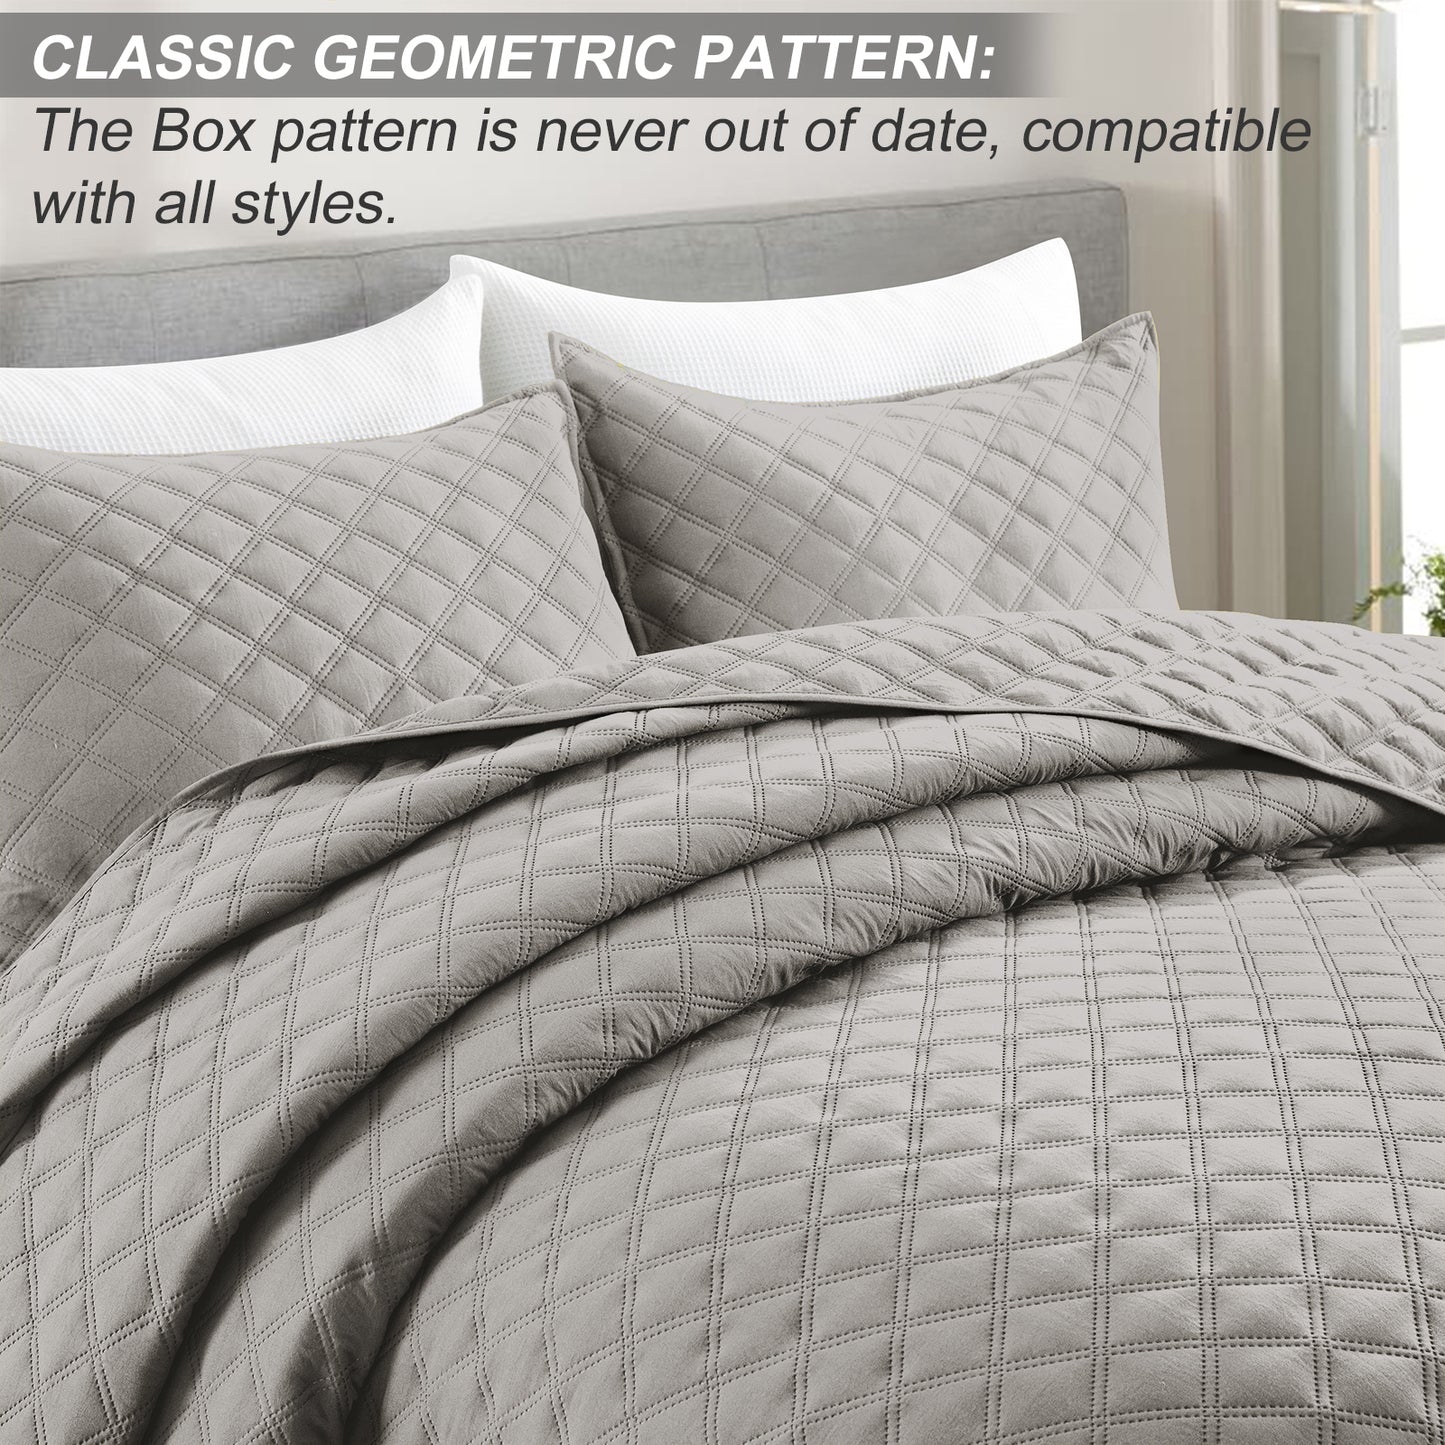 Exclusivo Mezcla 2-Piece Light Gray Twin Size Quilt Set, Box Pattern Ultrasonic Lightweight and Soft Quilts/Bedspreads/Coverlets/Bedding Set (1 Quilt, 1 Pillow Sham) for All Seasons